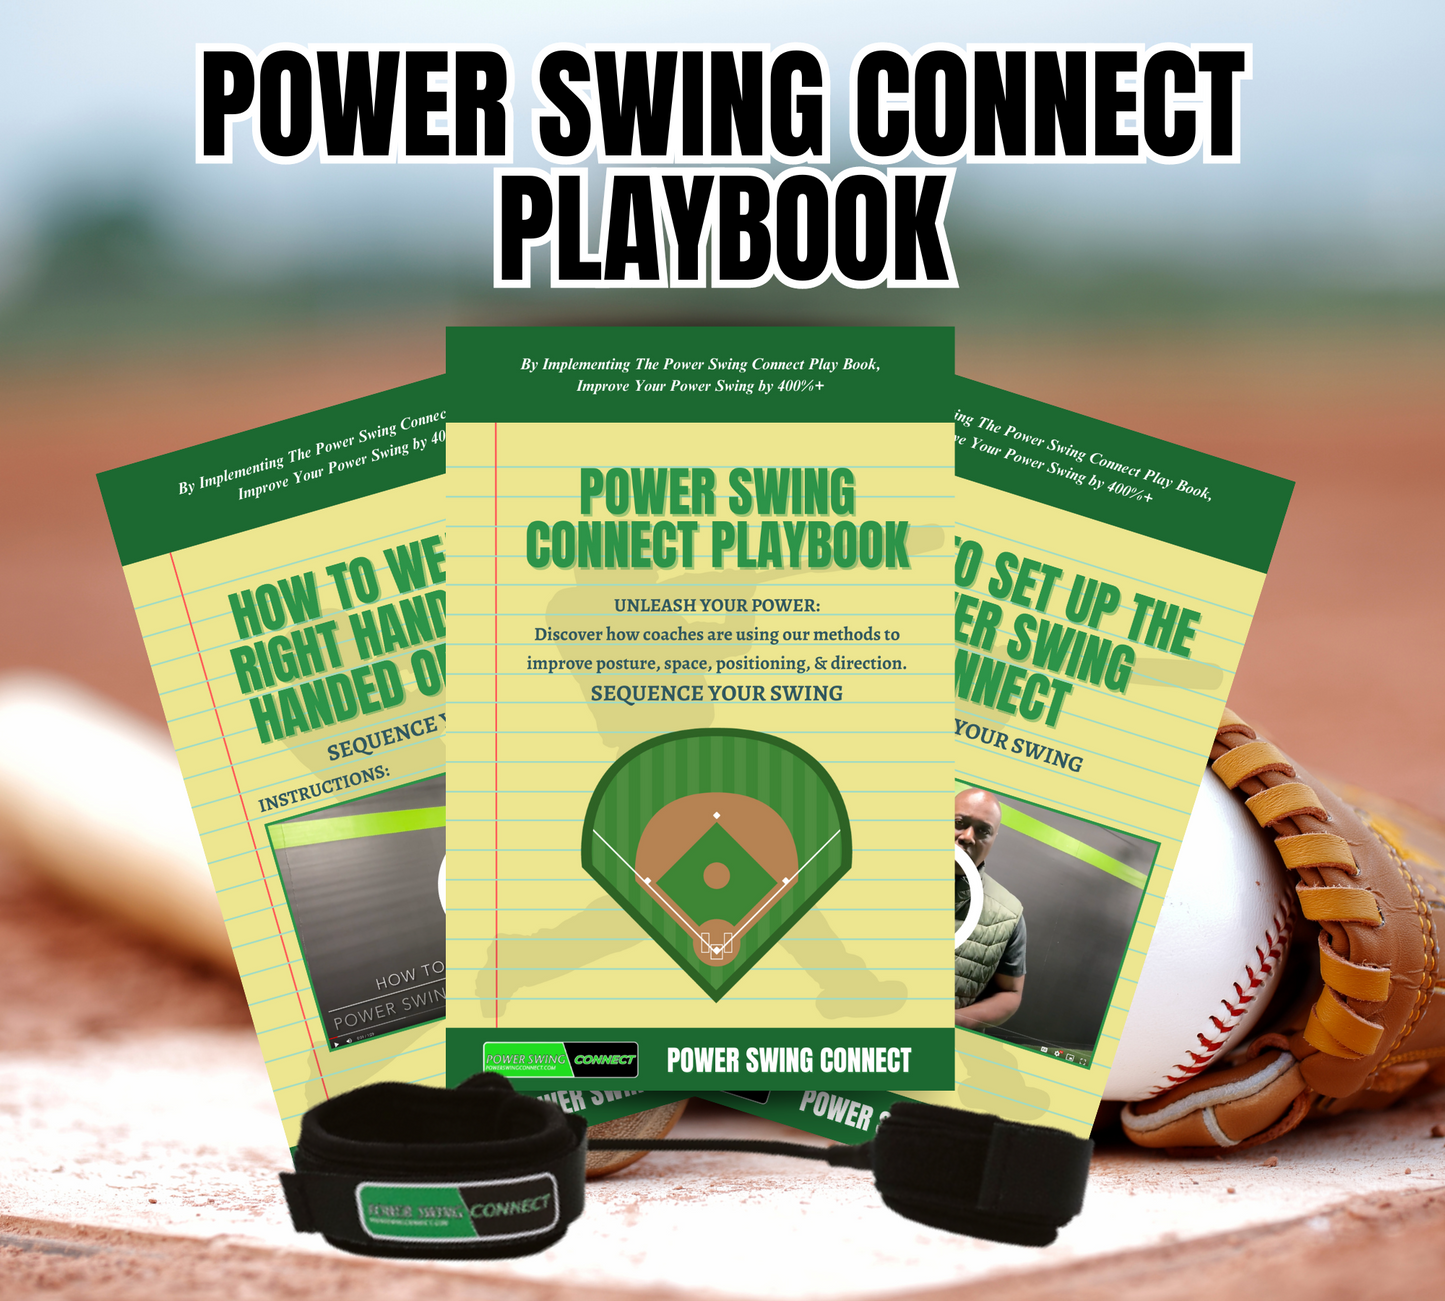 POWER SWING CONNECT + Playbook